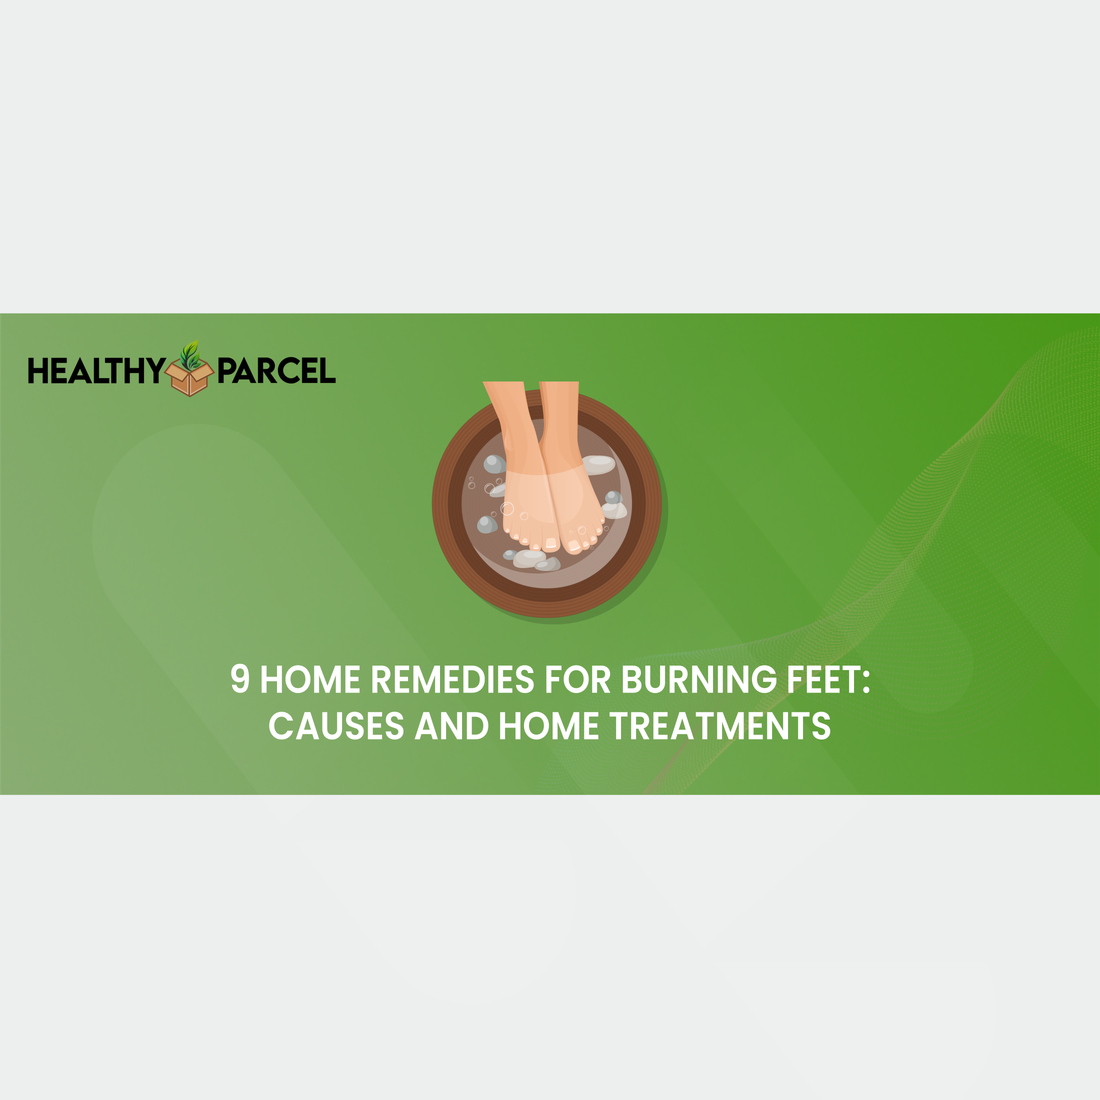 Feature image 9 Home Remedies for Burning Feet Causes and Home Treatments